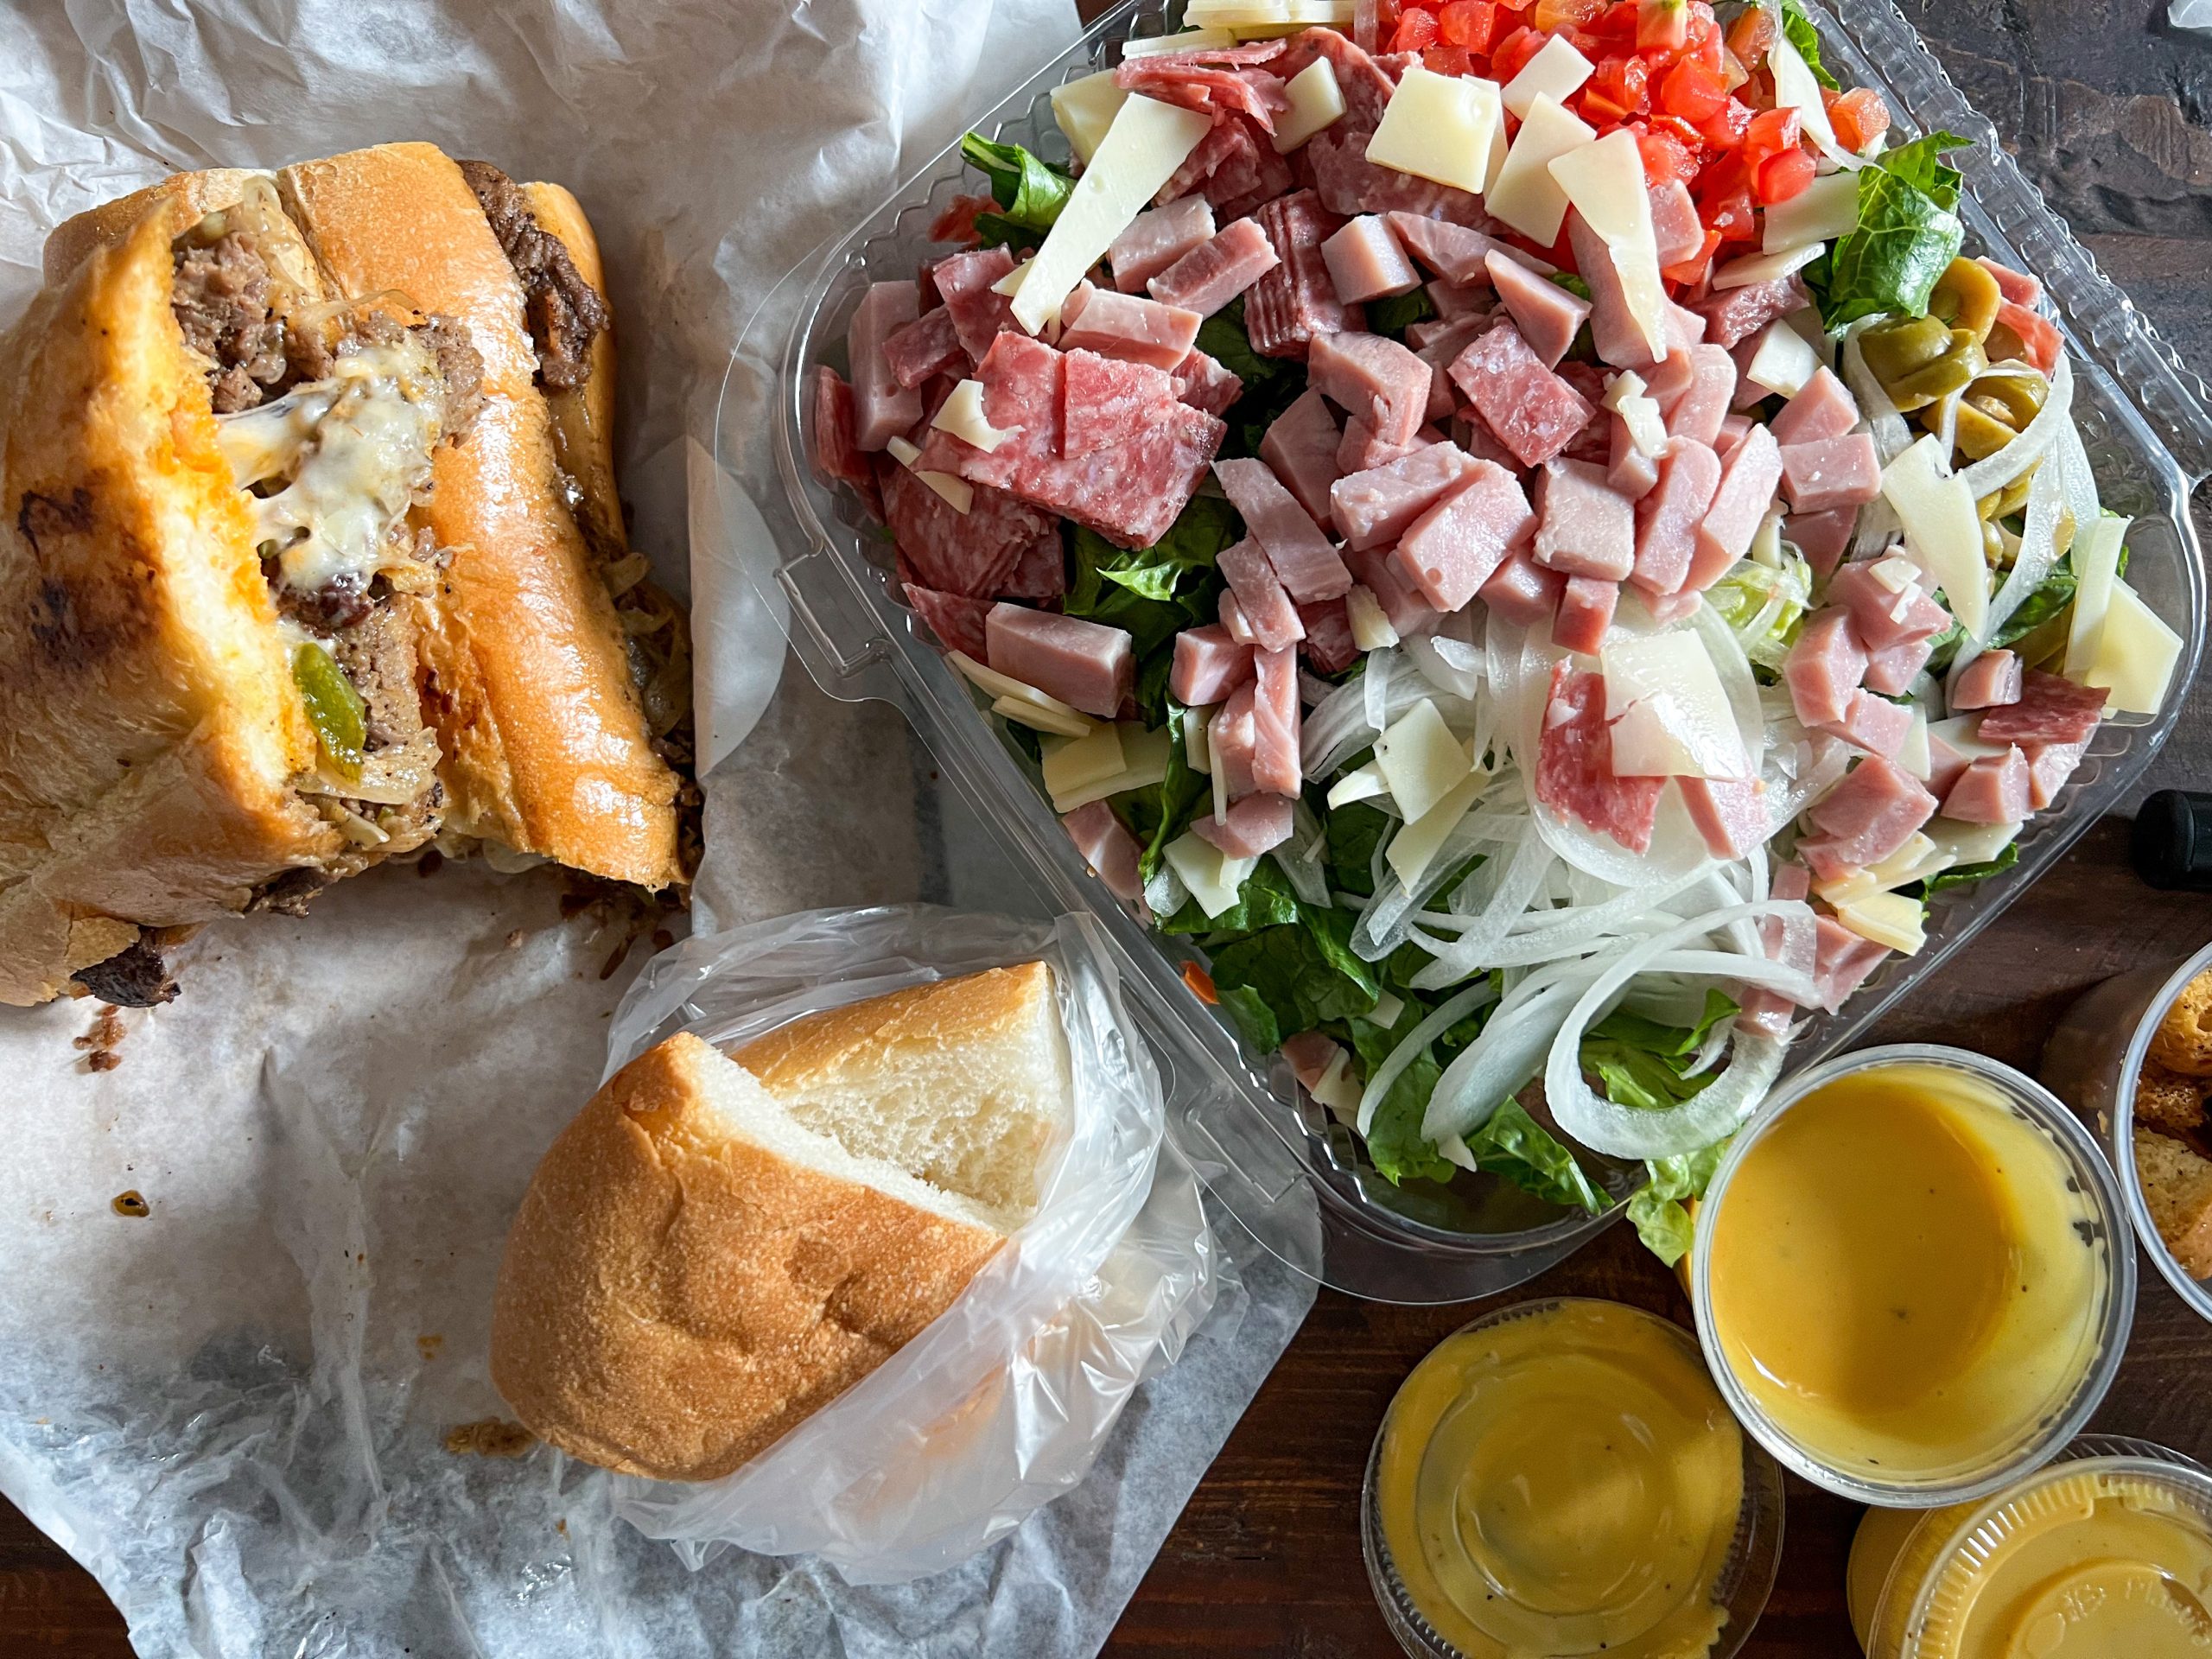 Spanish Salad and the Tampa Cheese Steak ordered to-go from the Tampa Kennedy location